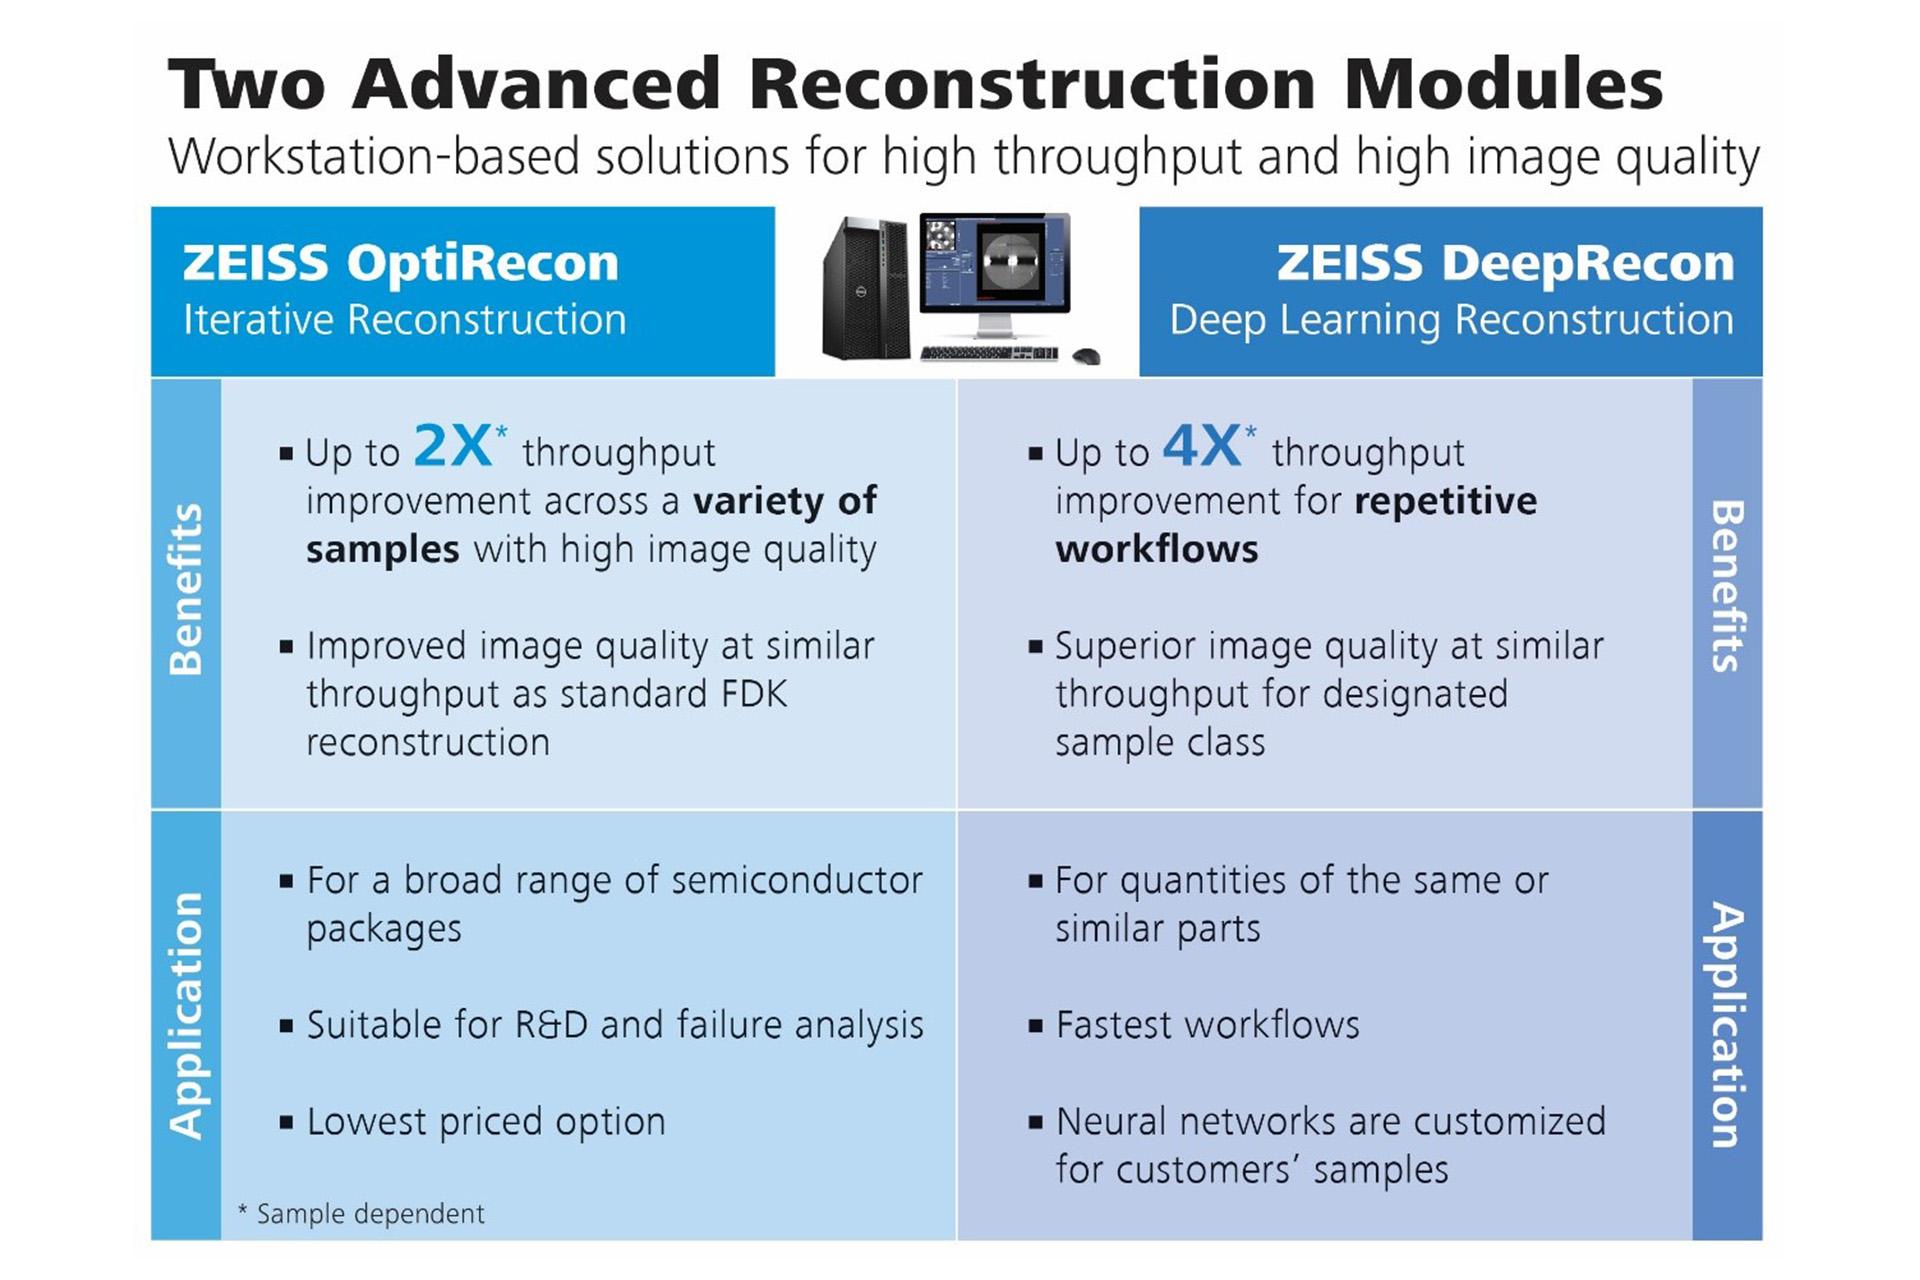 Table of two advanced reconstruction modules